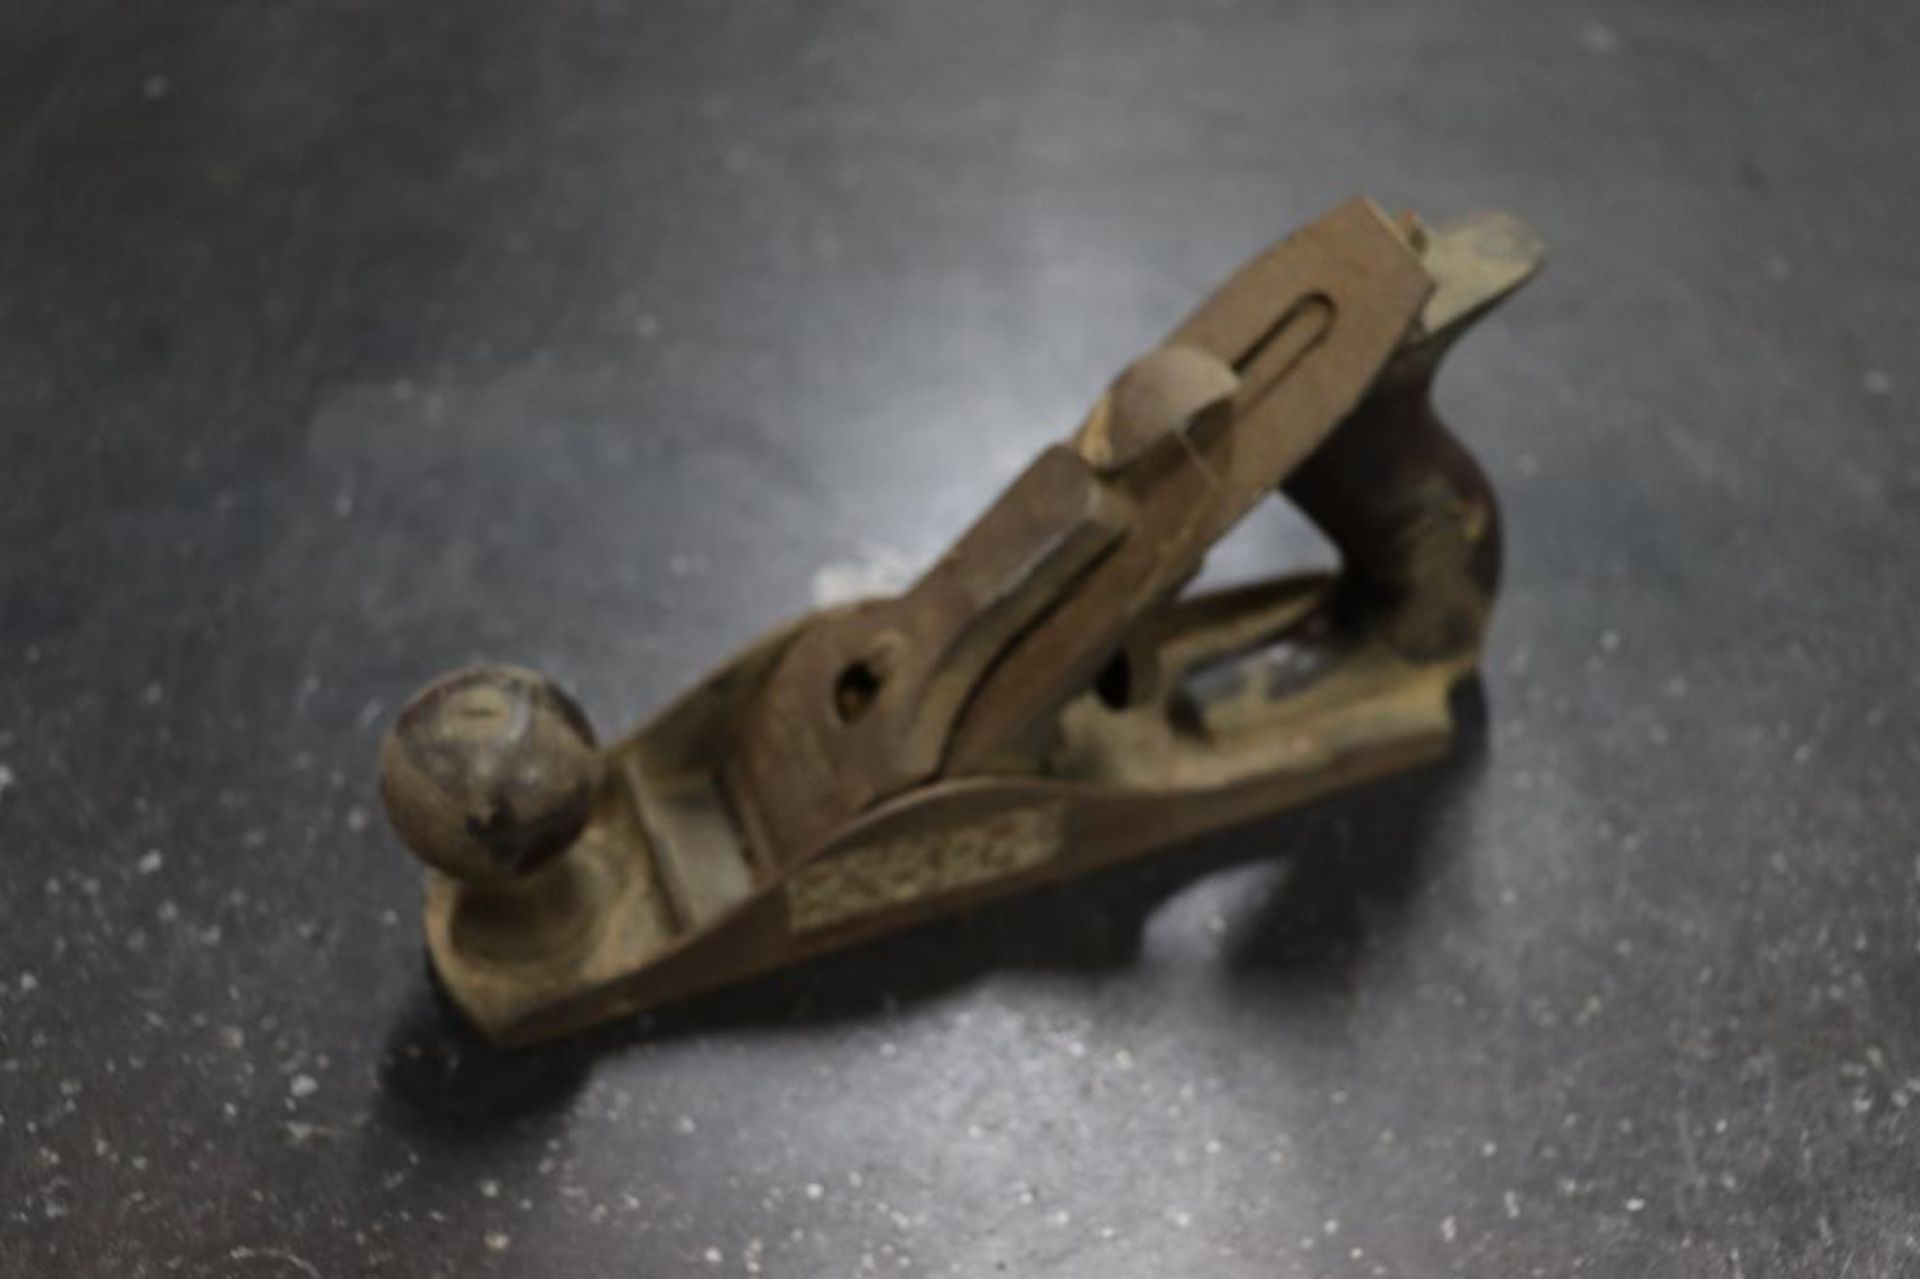 Stanley plane & jig saw drill attachment - Image 5 of 7